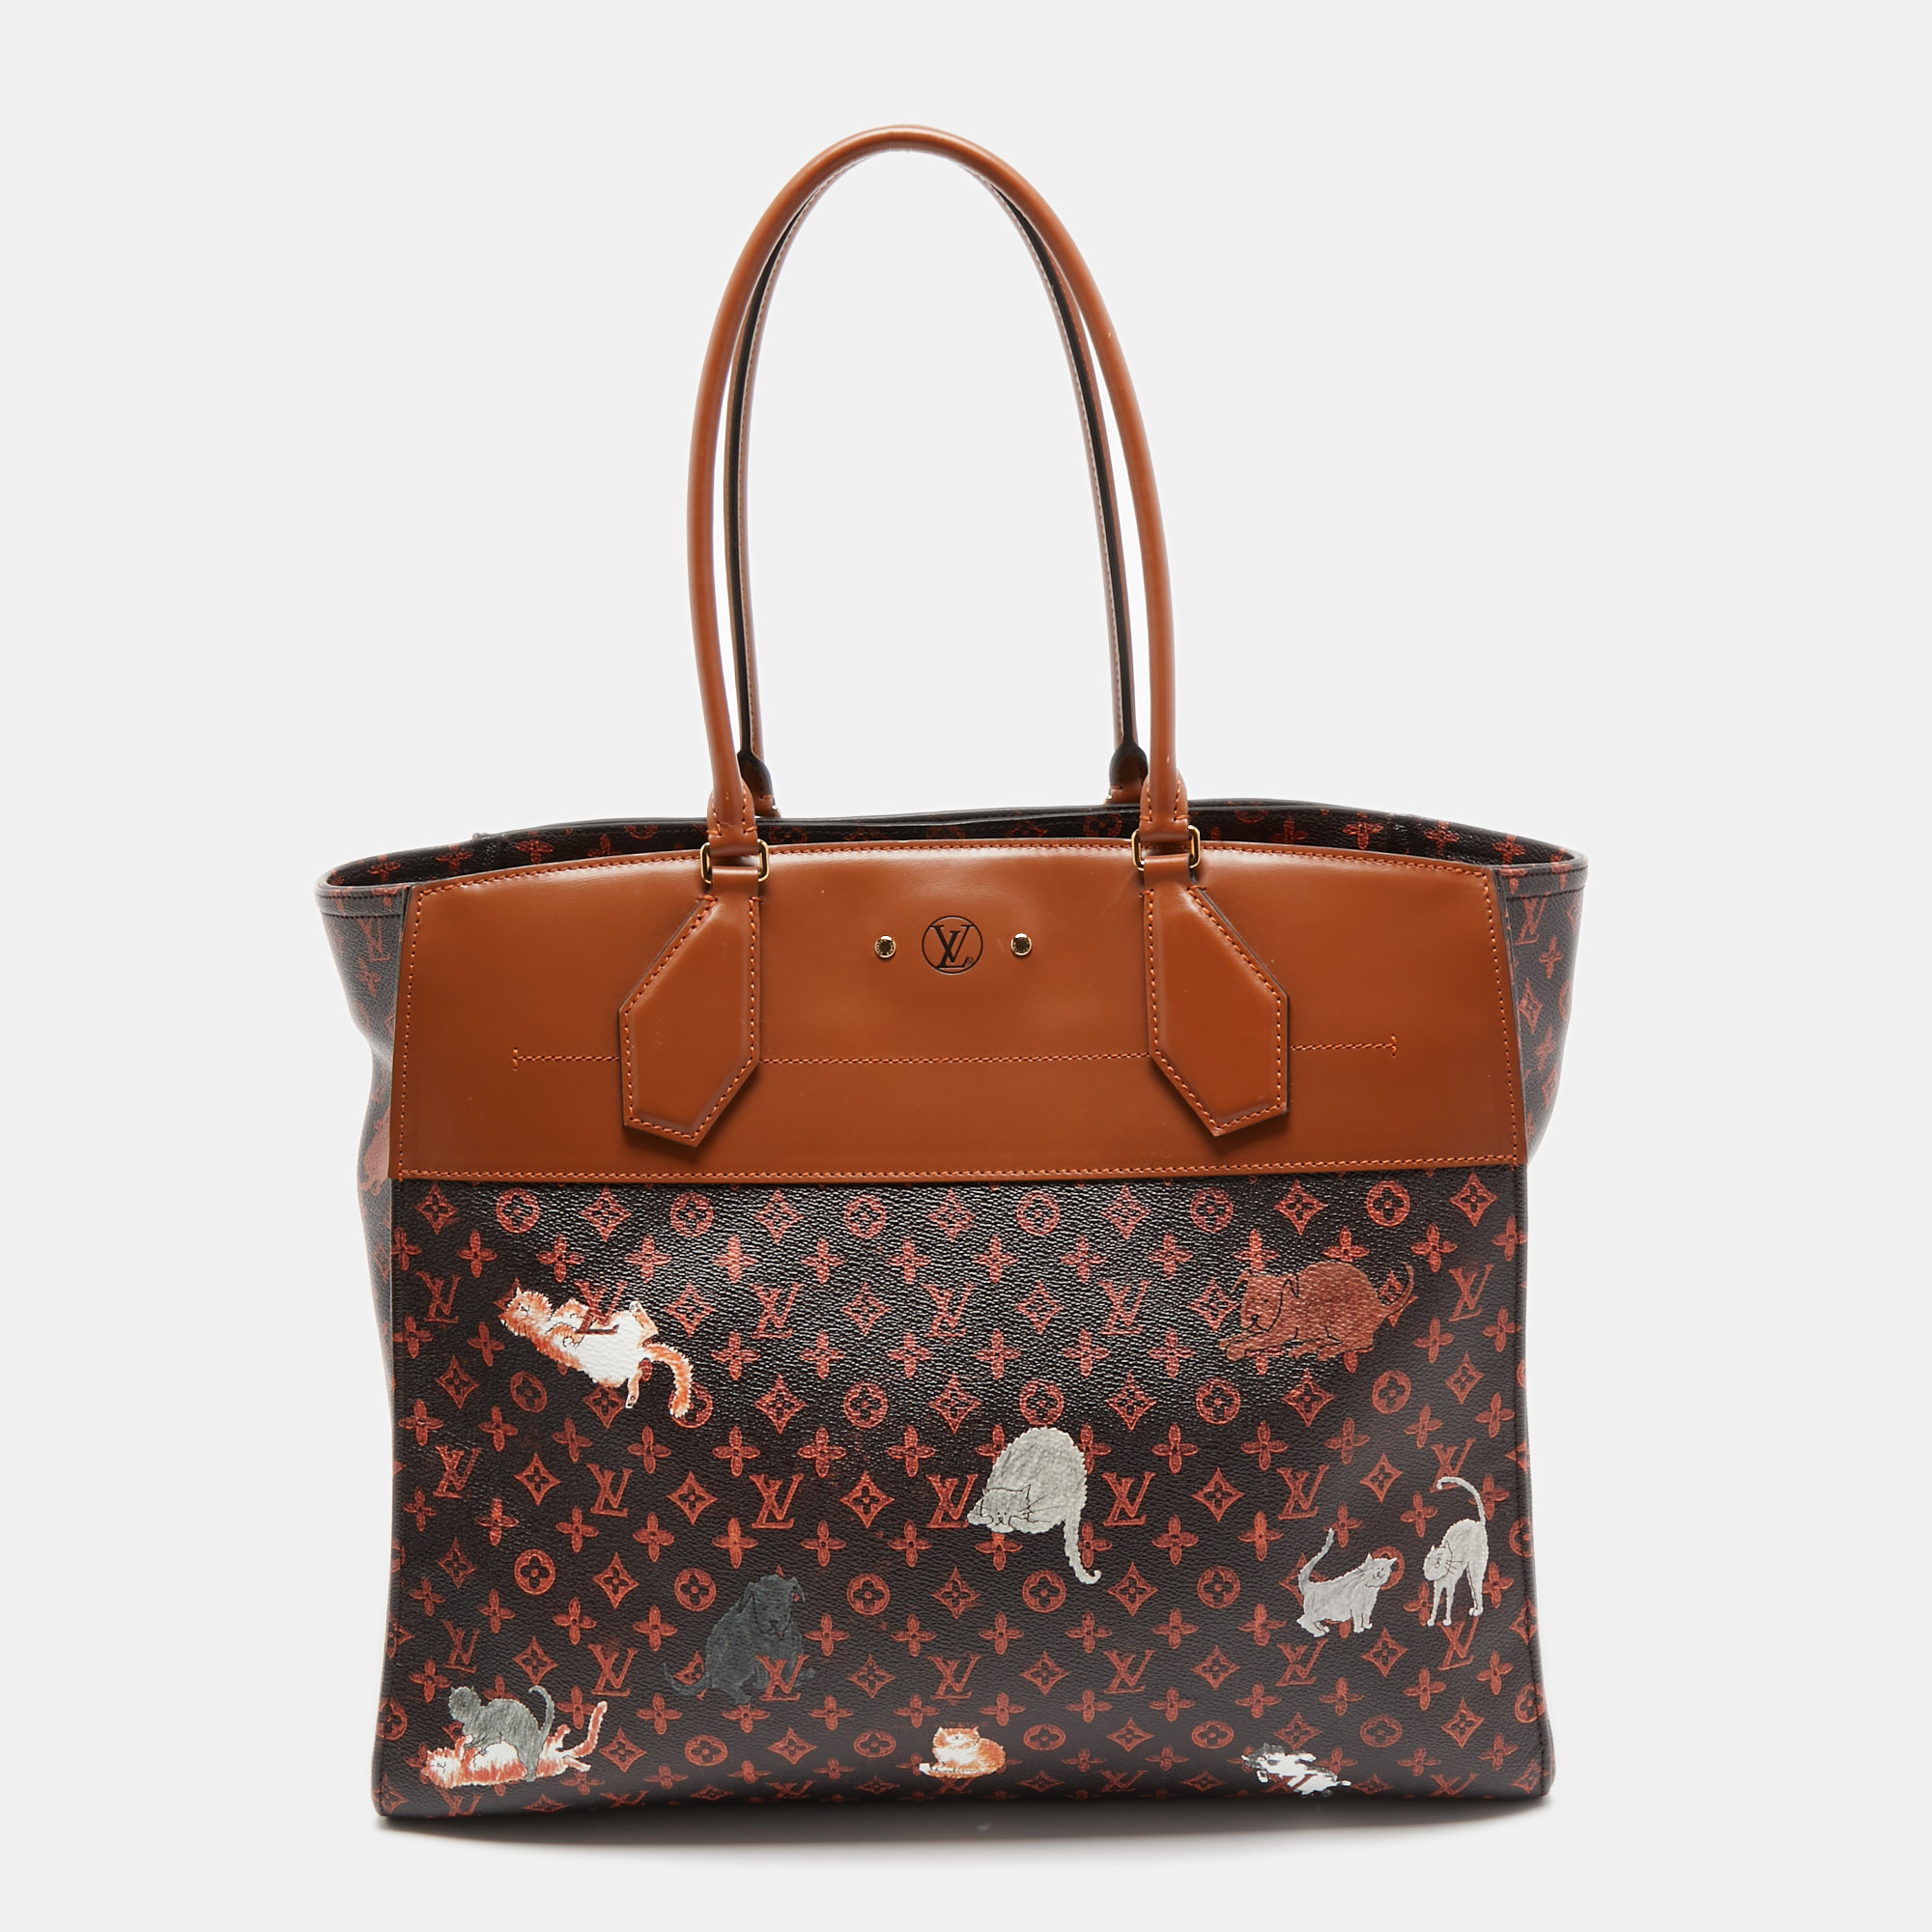 For those who own the CITY STEAMER XXL, is it worth it? : r/Louisvuitton